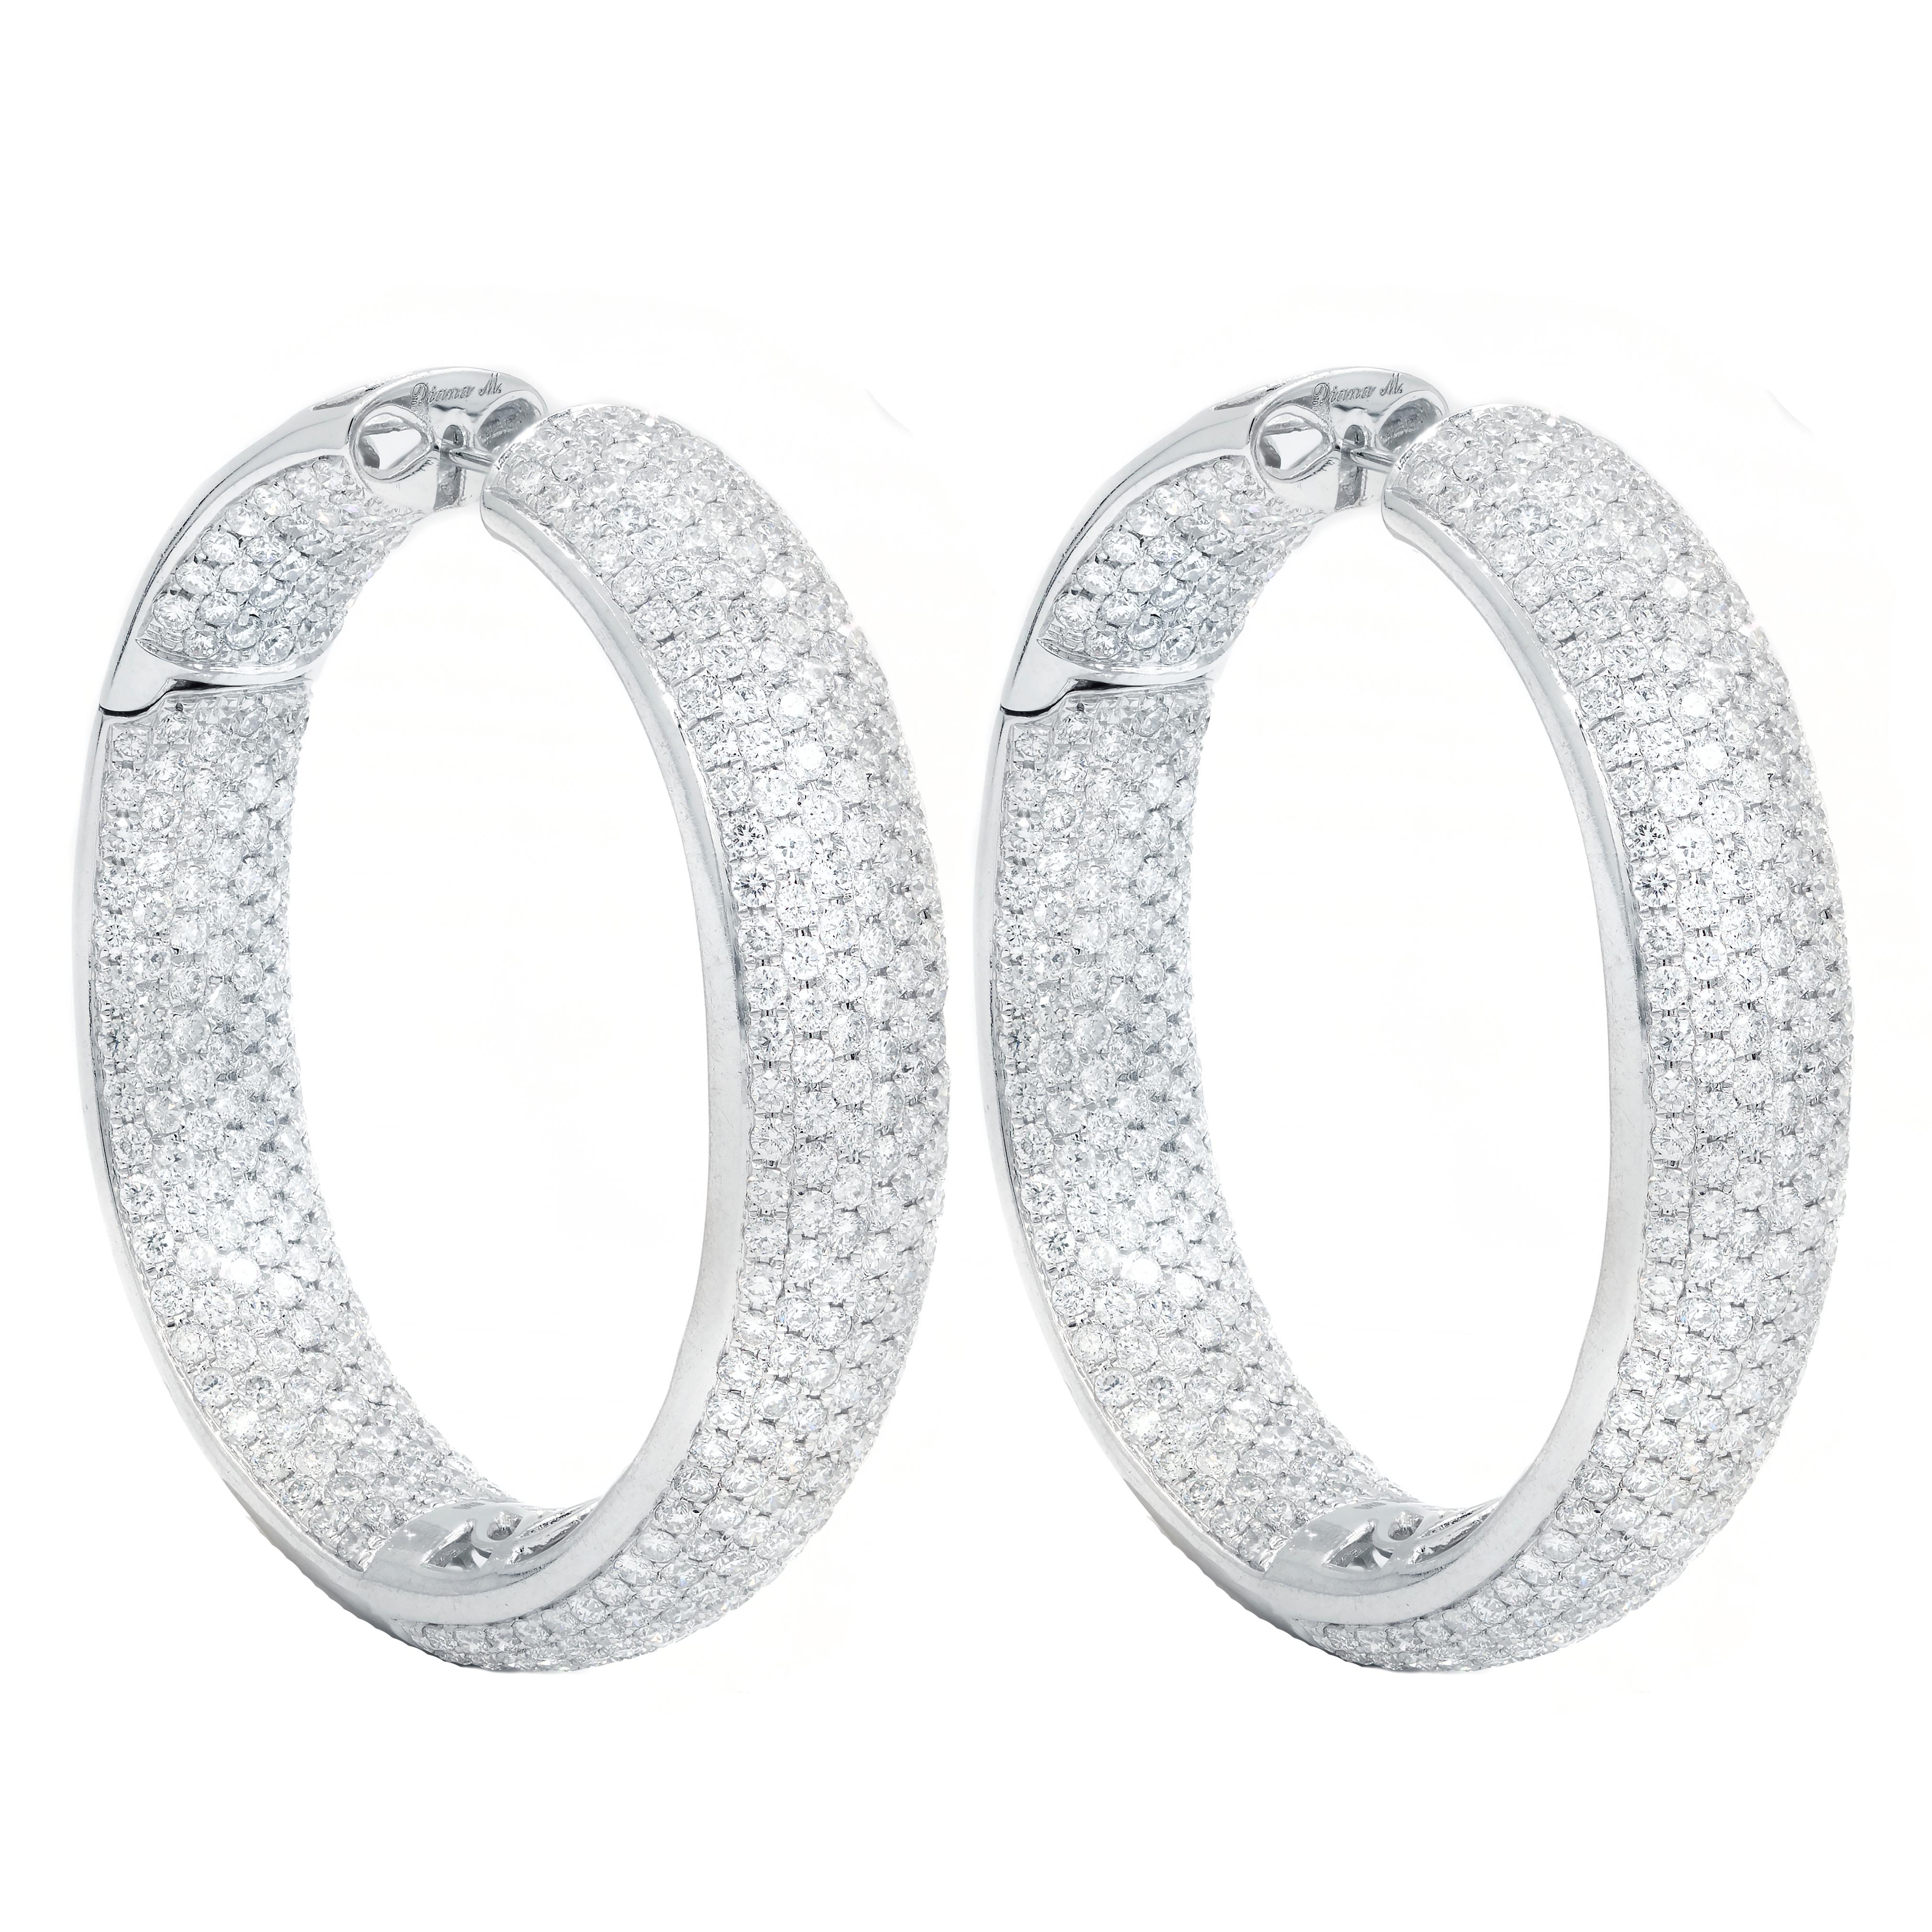 18 kt white gold inside-out hoop earrings adorned with 5 rows of 16.75 cts tw of round diamonds
Diana M. is a leading supplier of top-quality fine jewelry for over 35 years.
Diana M is one-stop shop for all your jewelry shopping, carrying line of